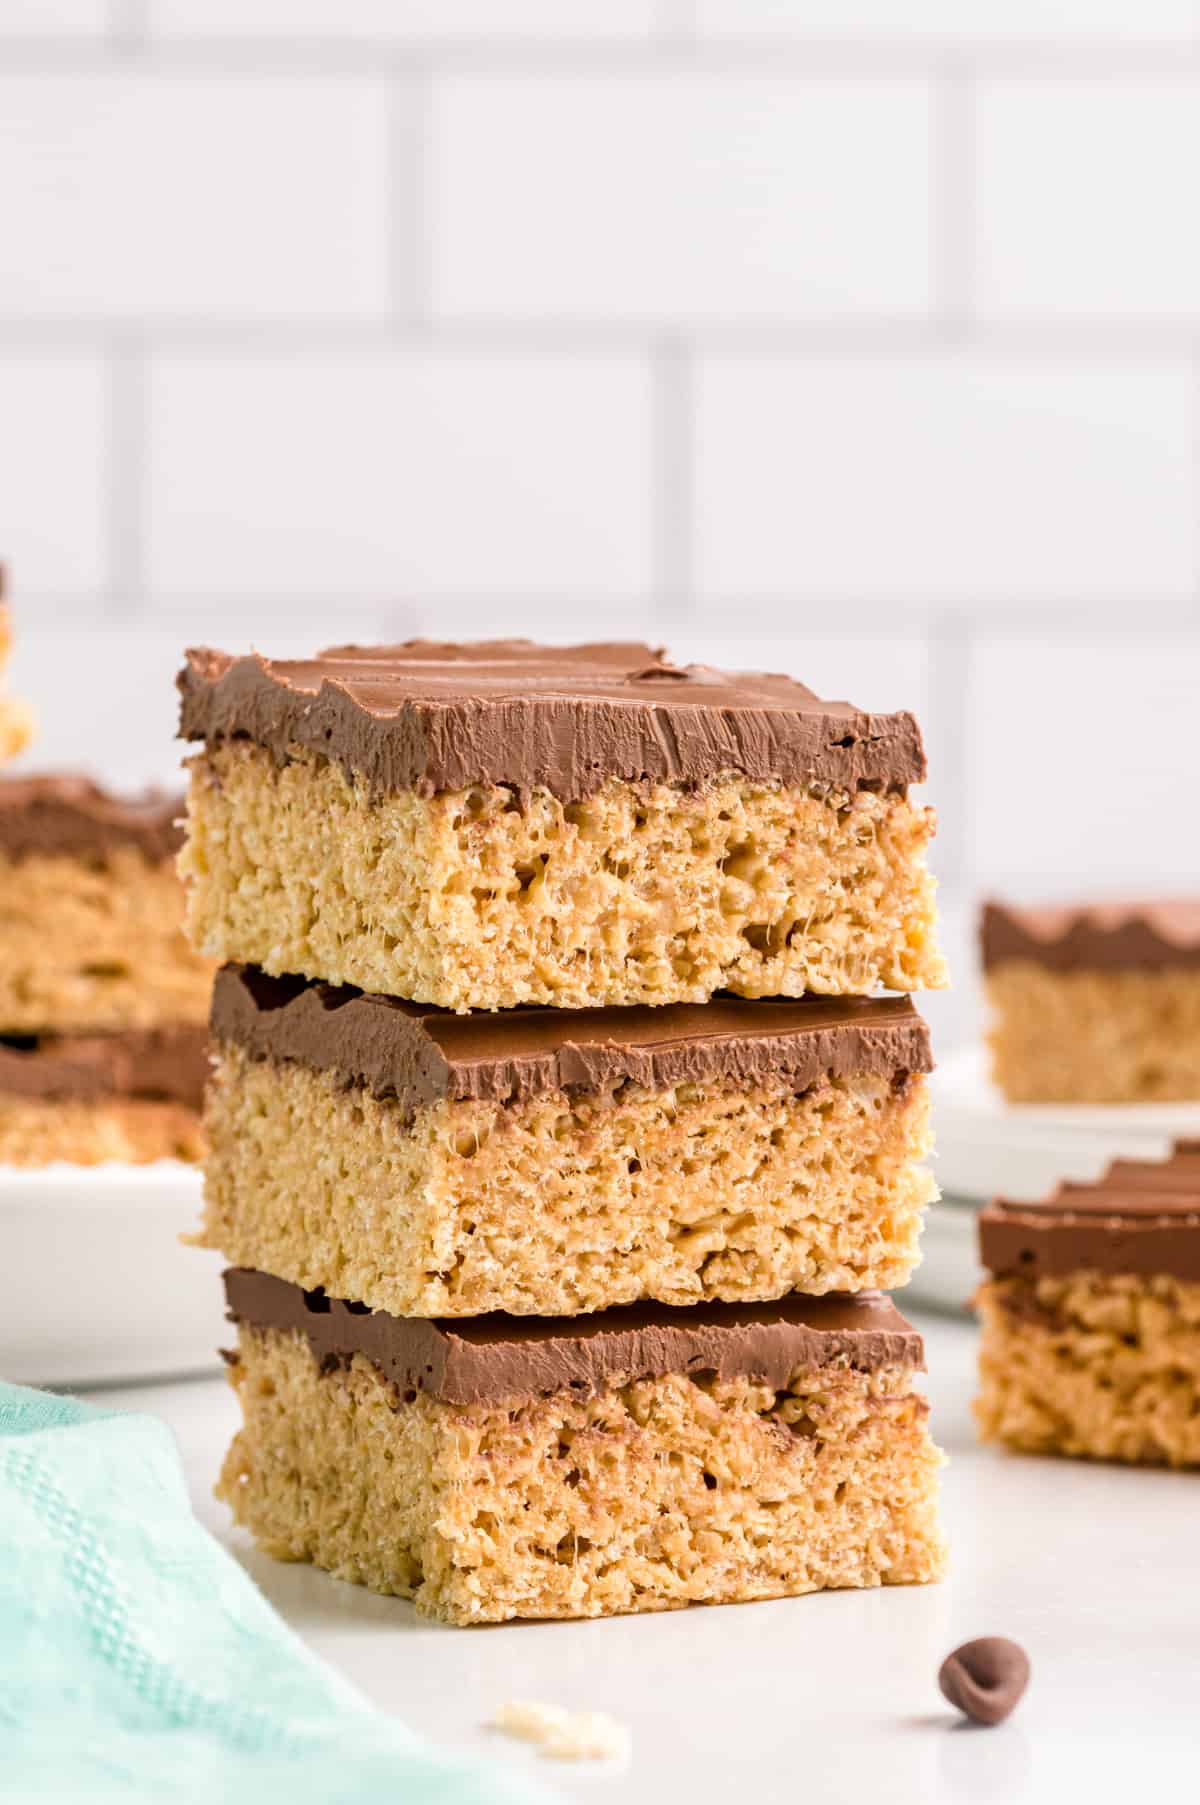 Peanut butter rice krispie treats with chocolate topping stacked three on top of each other.